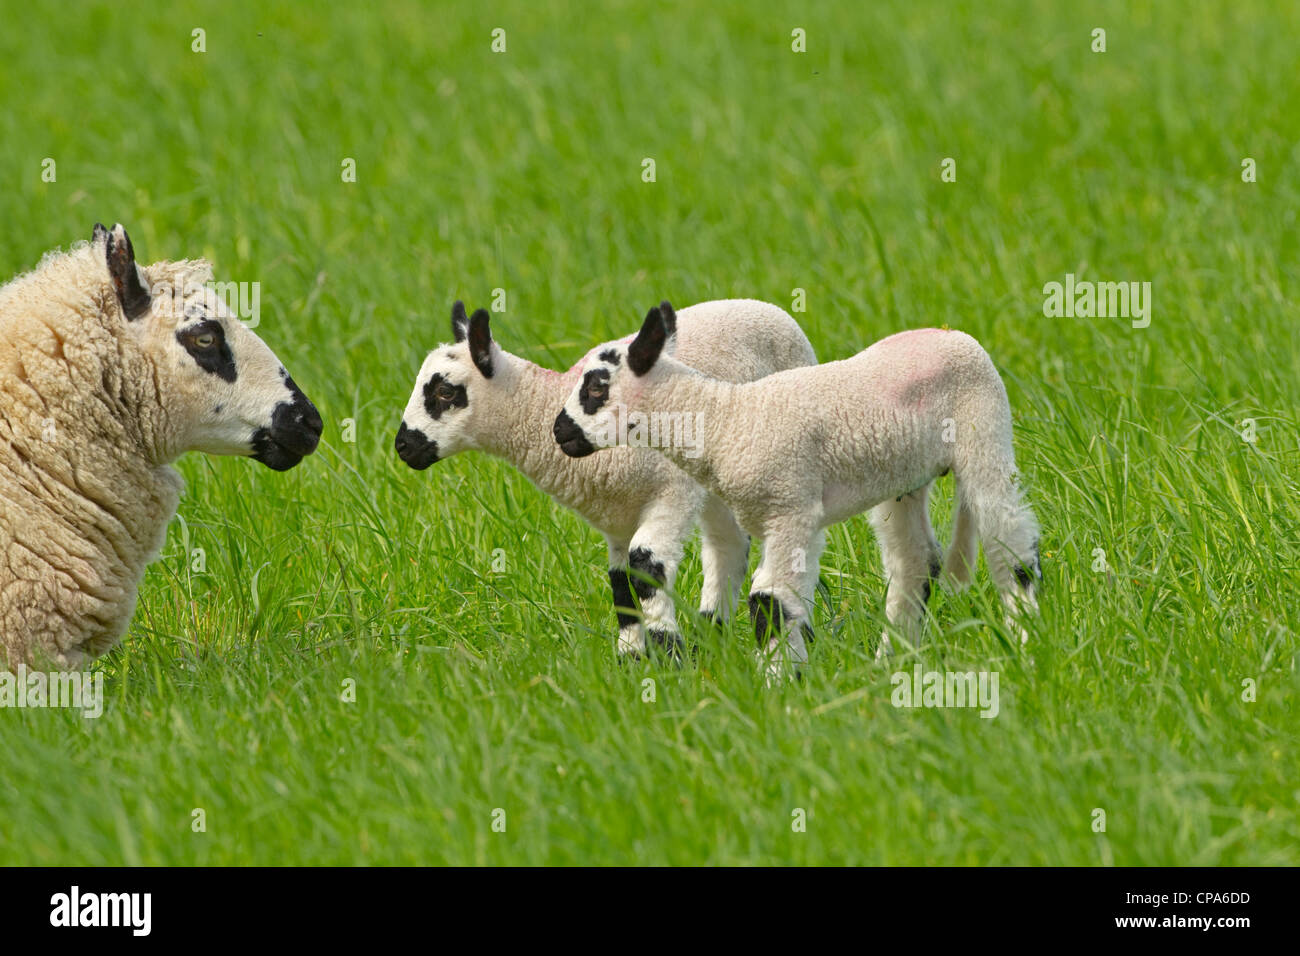 Kerry Hill Sheep flock showing ewes and lambs on Spring grass Stock Photo